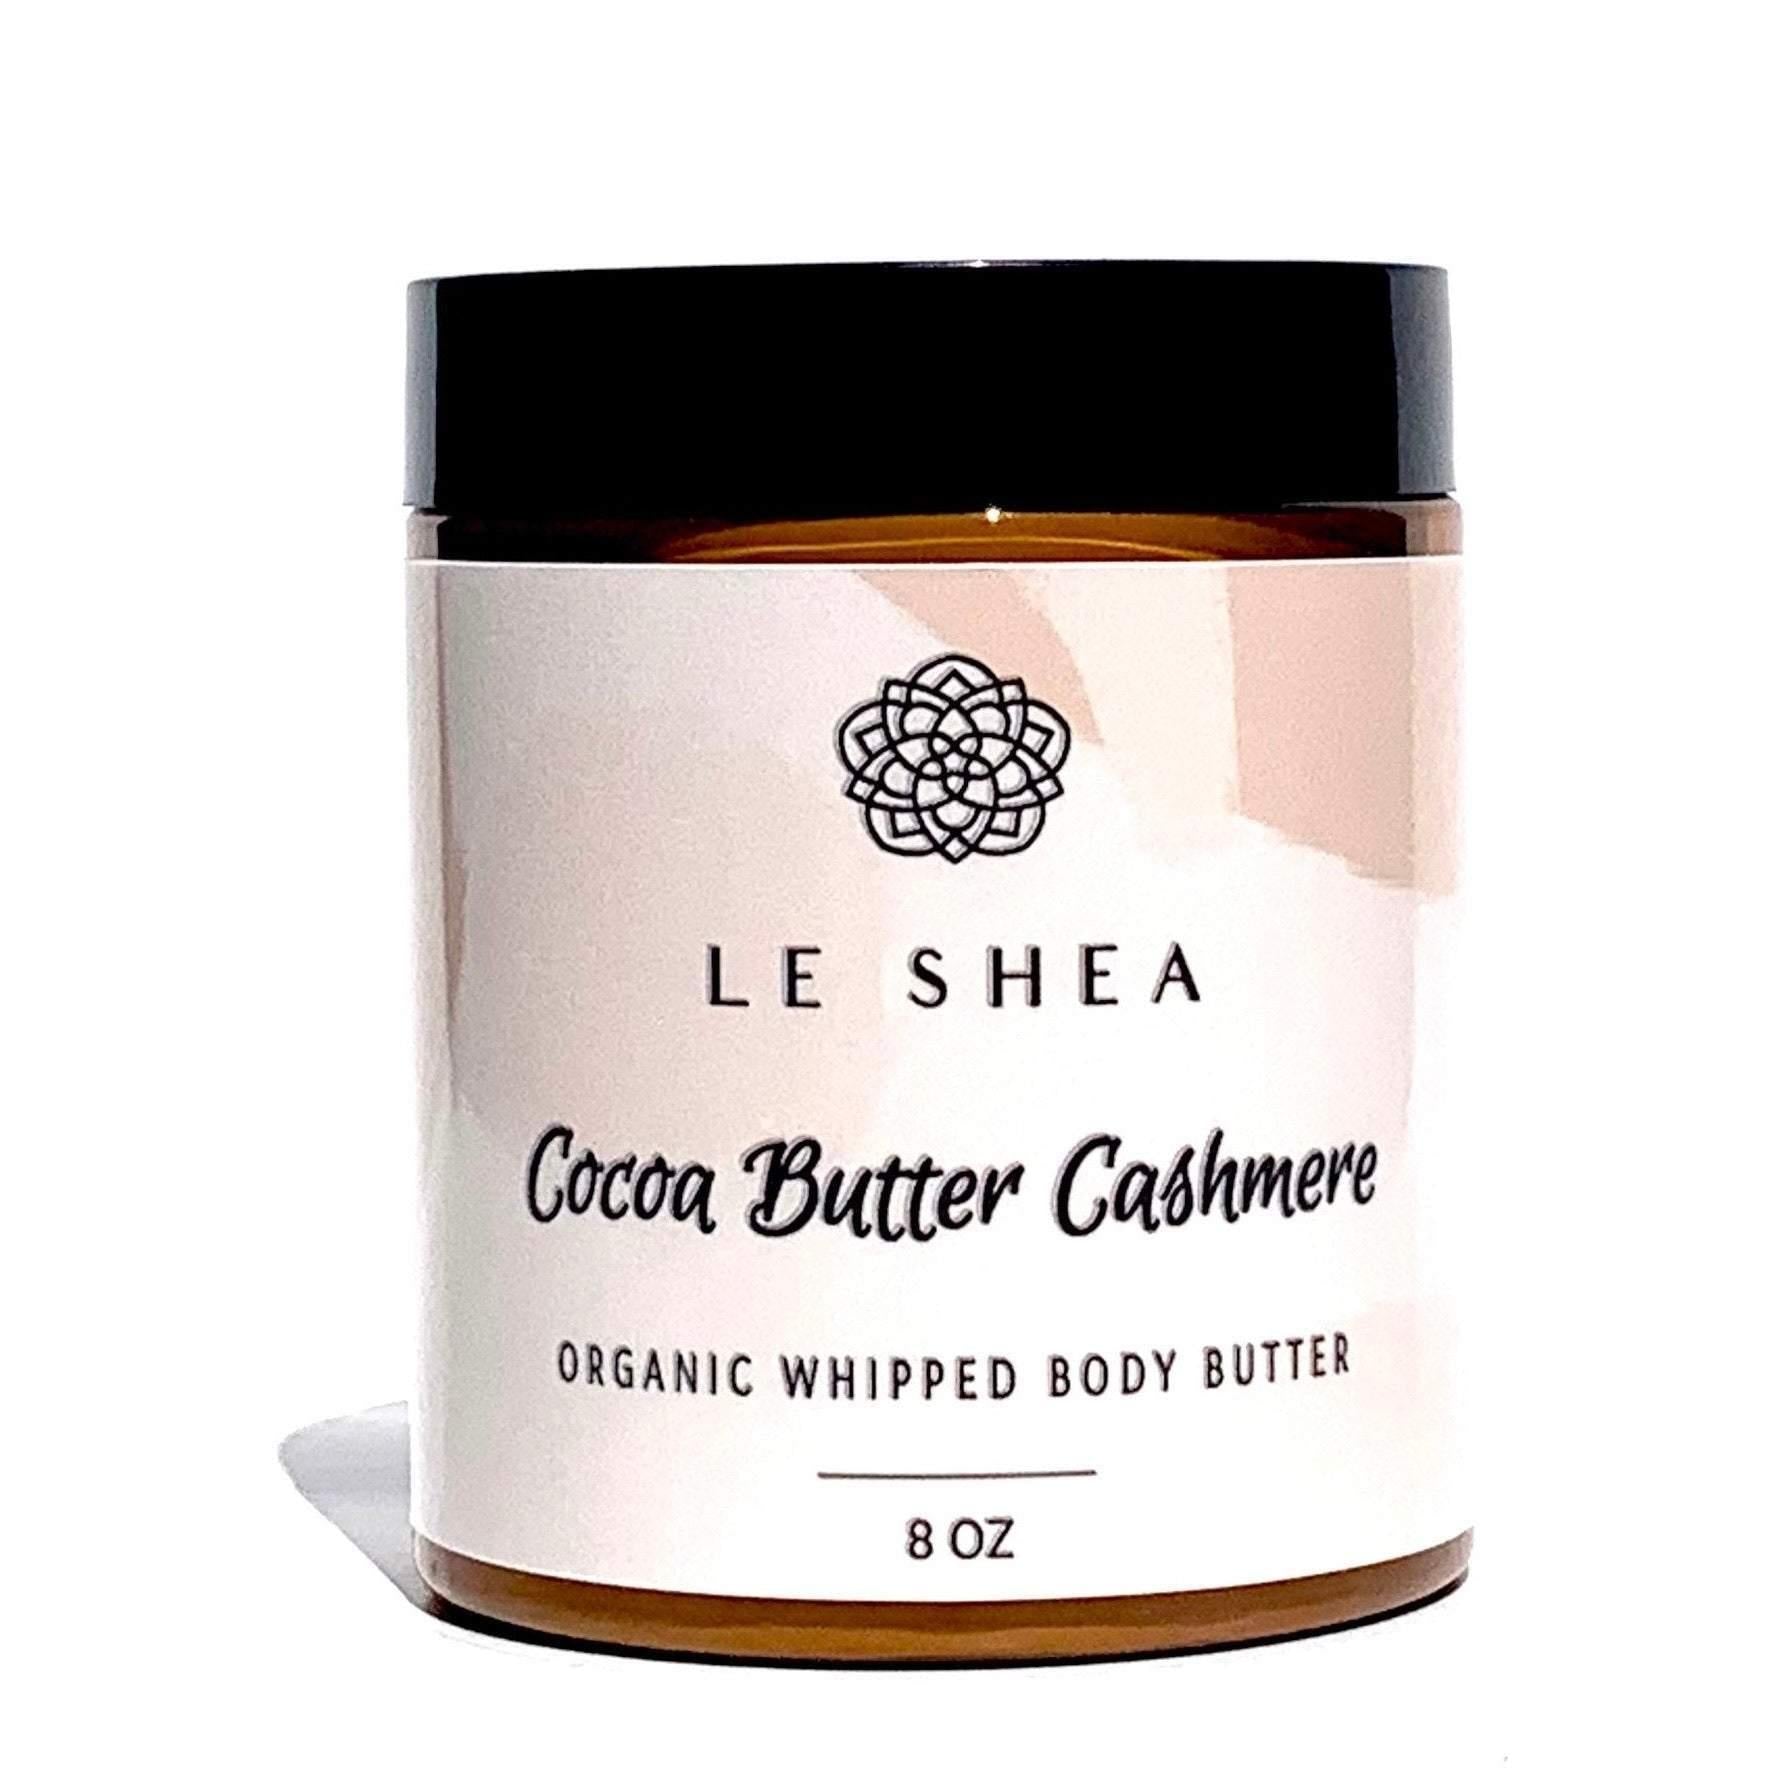 LE SHEA Cocoa Butter Cashmere Whipped Body Butter Le Shea’s Essentials